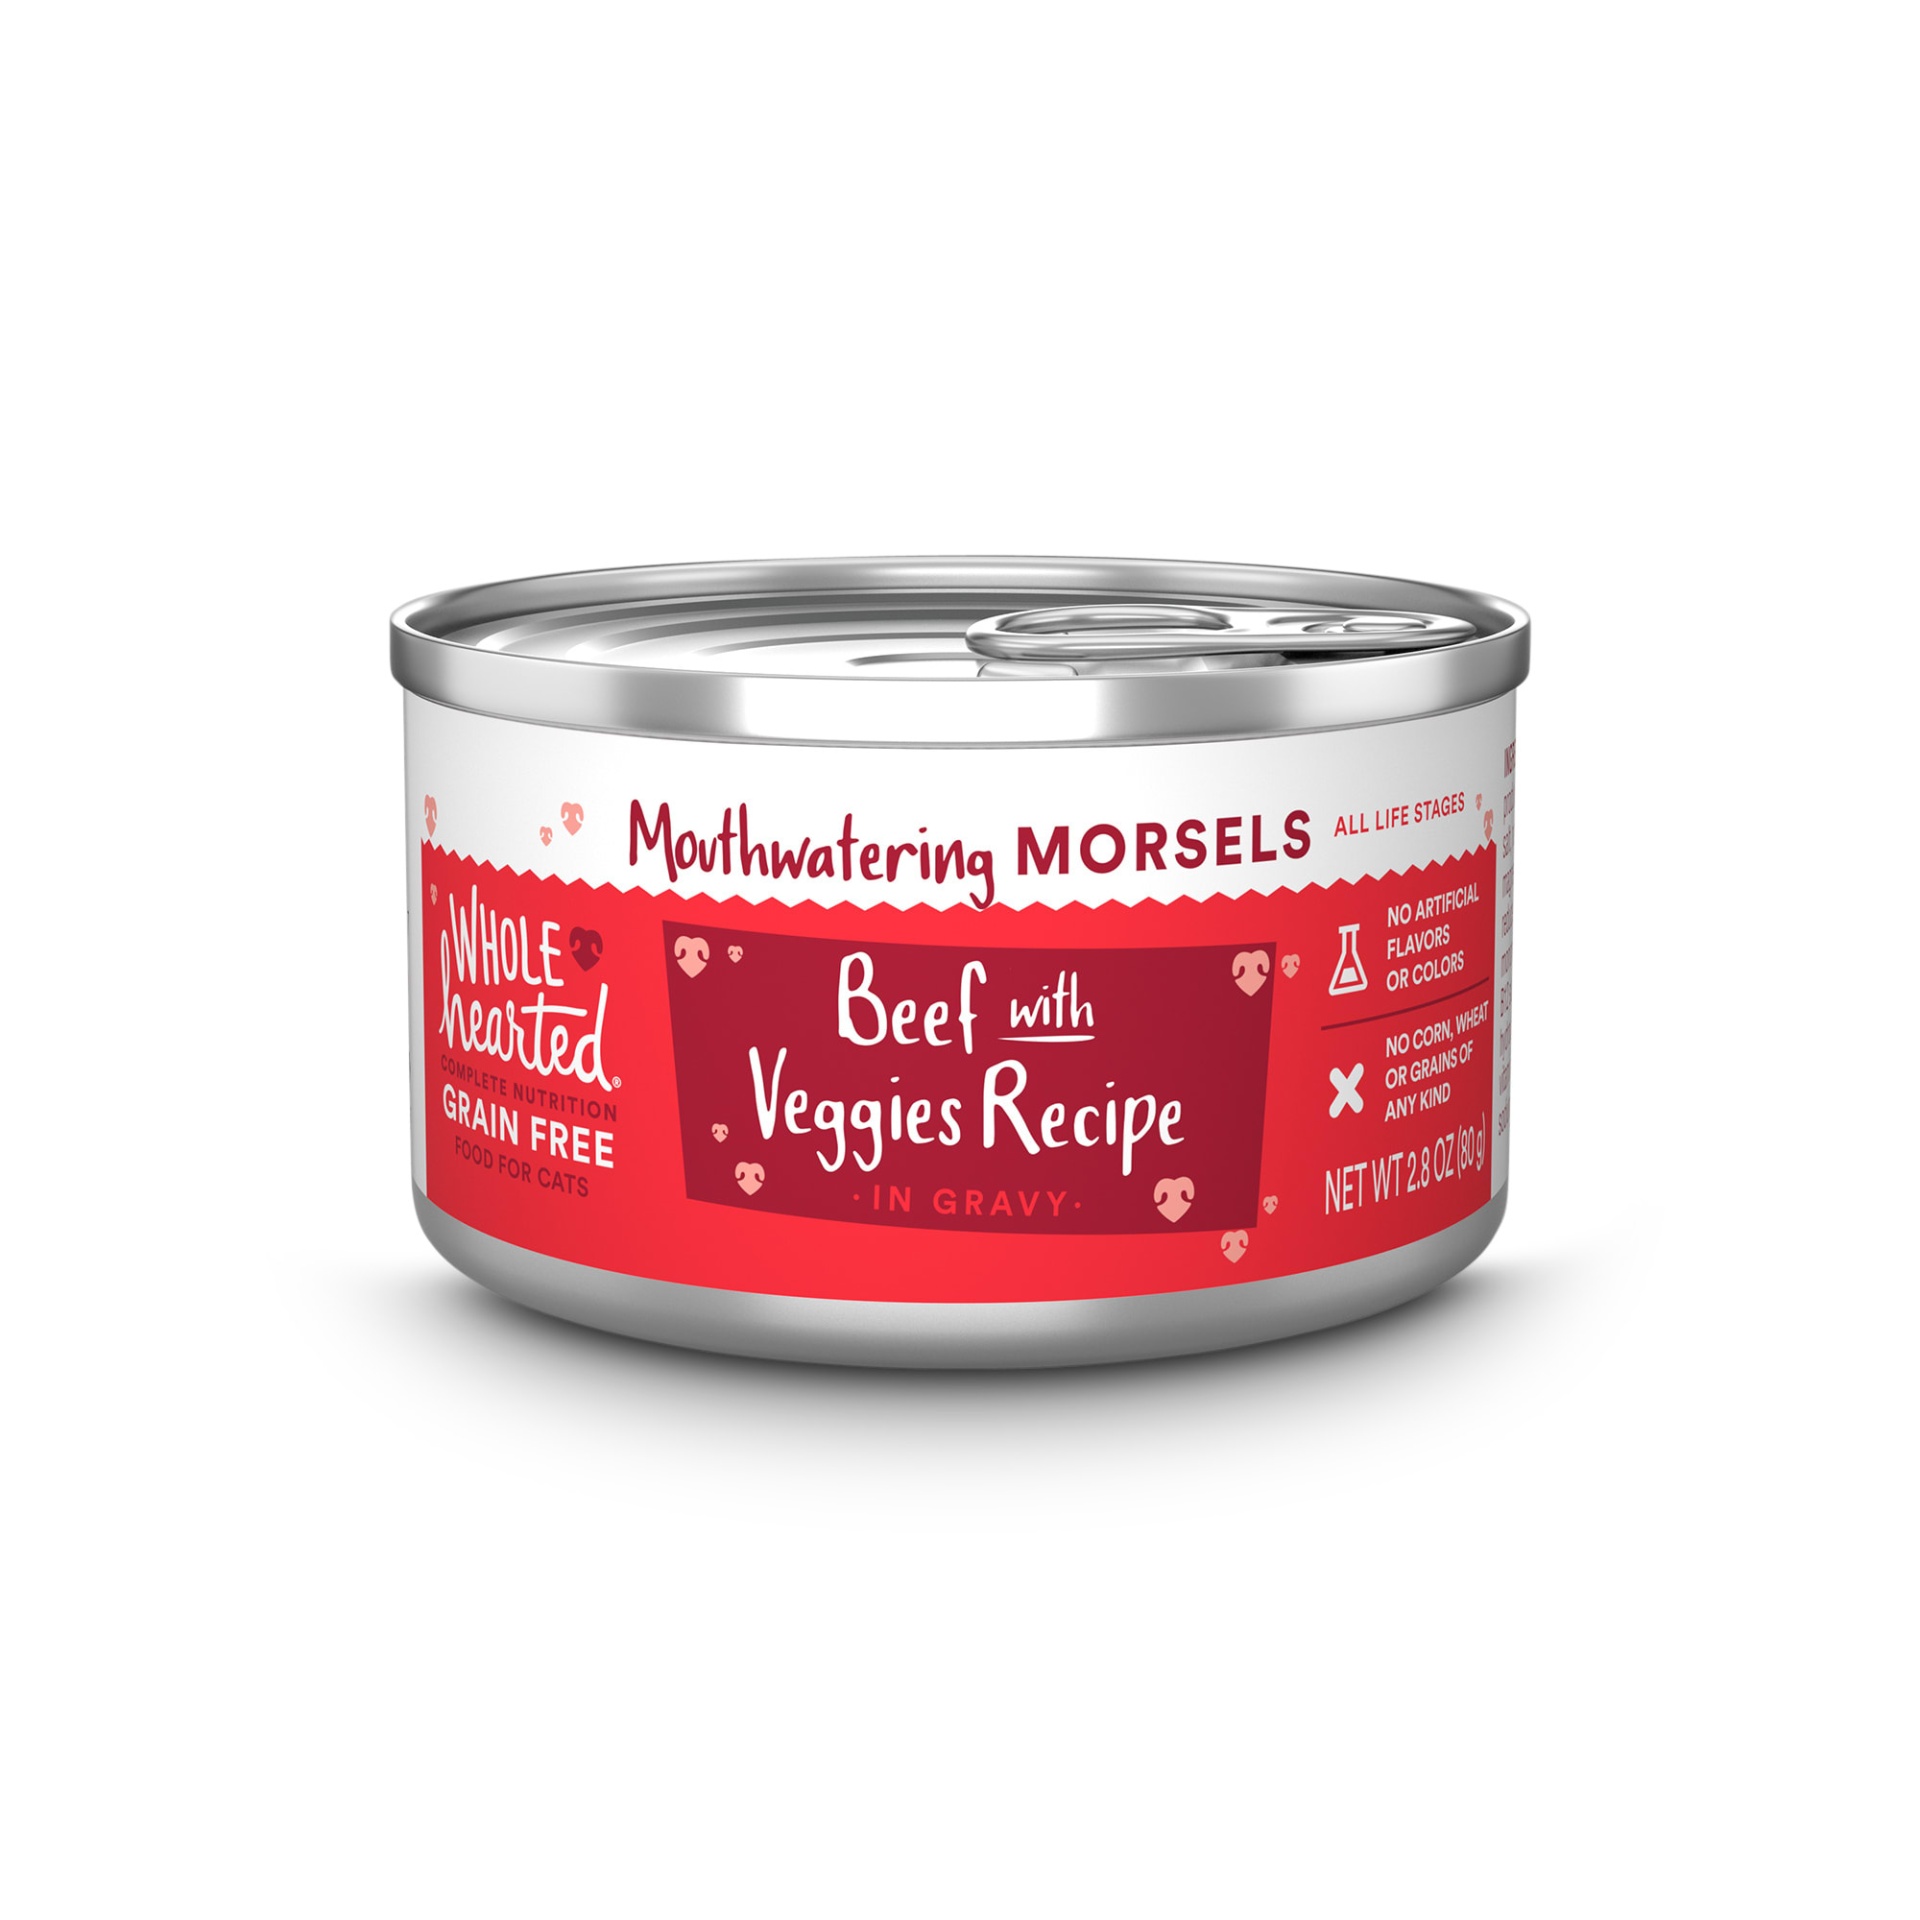 slide 1 of 1, Whd-Cat 2.8Z Beef&Veg Morsel, 1 ct